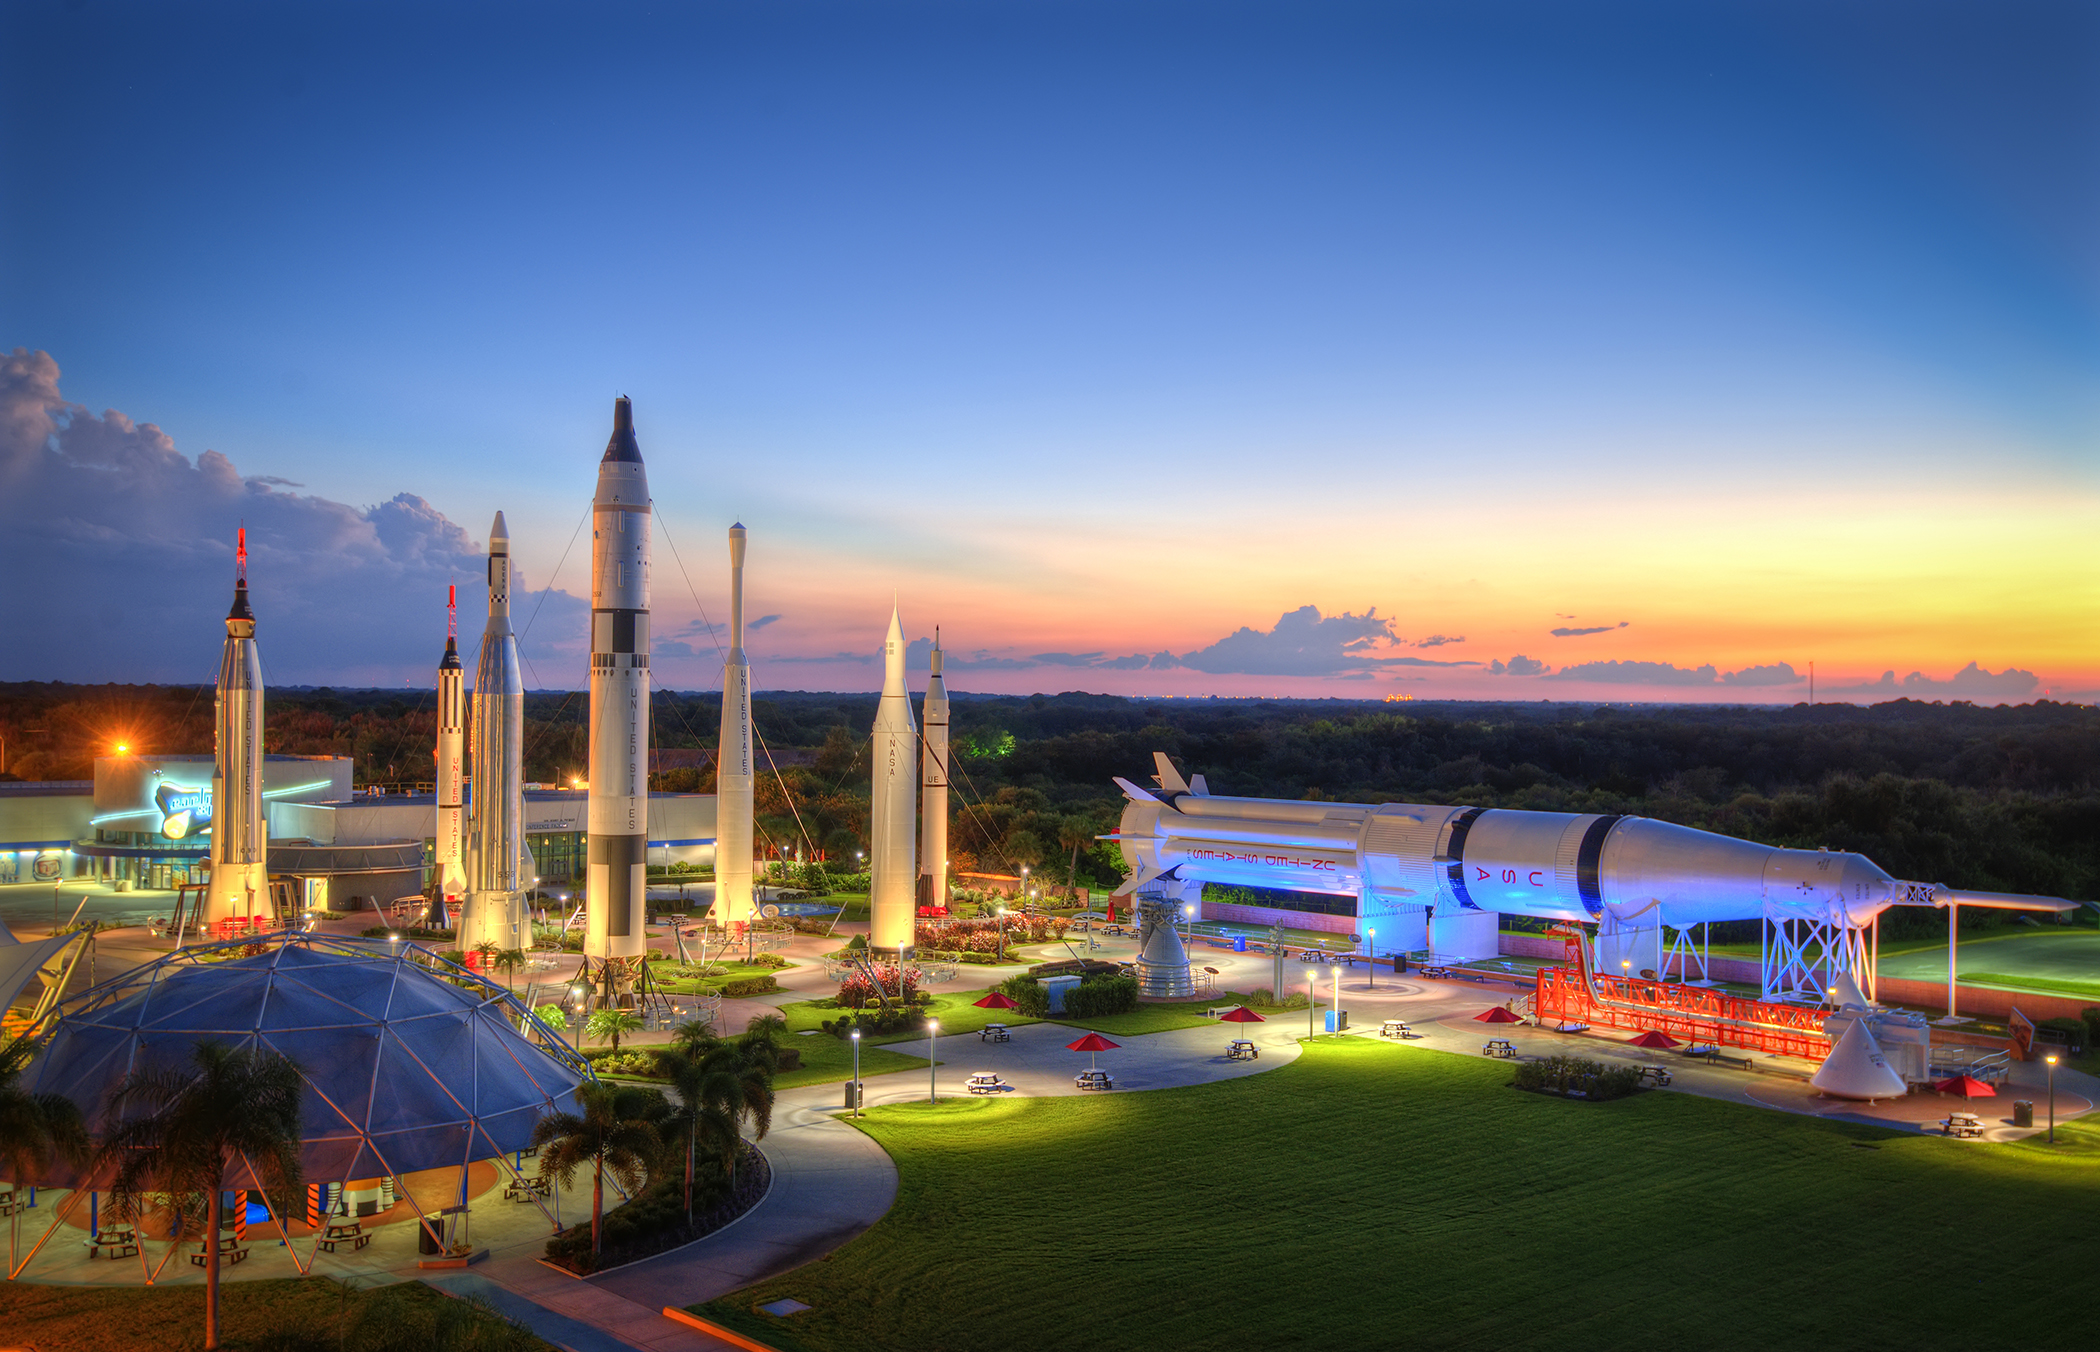 America’s history in space is laid out before your very eyes in the majestic Rocket Garden.